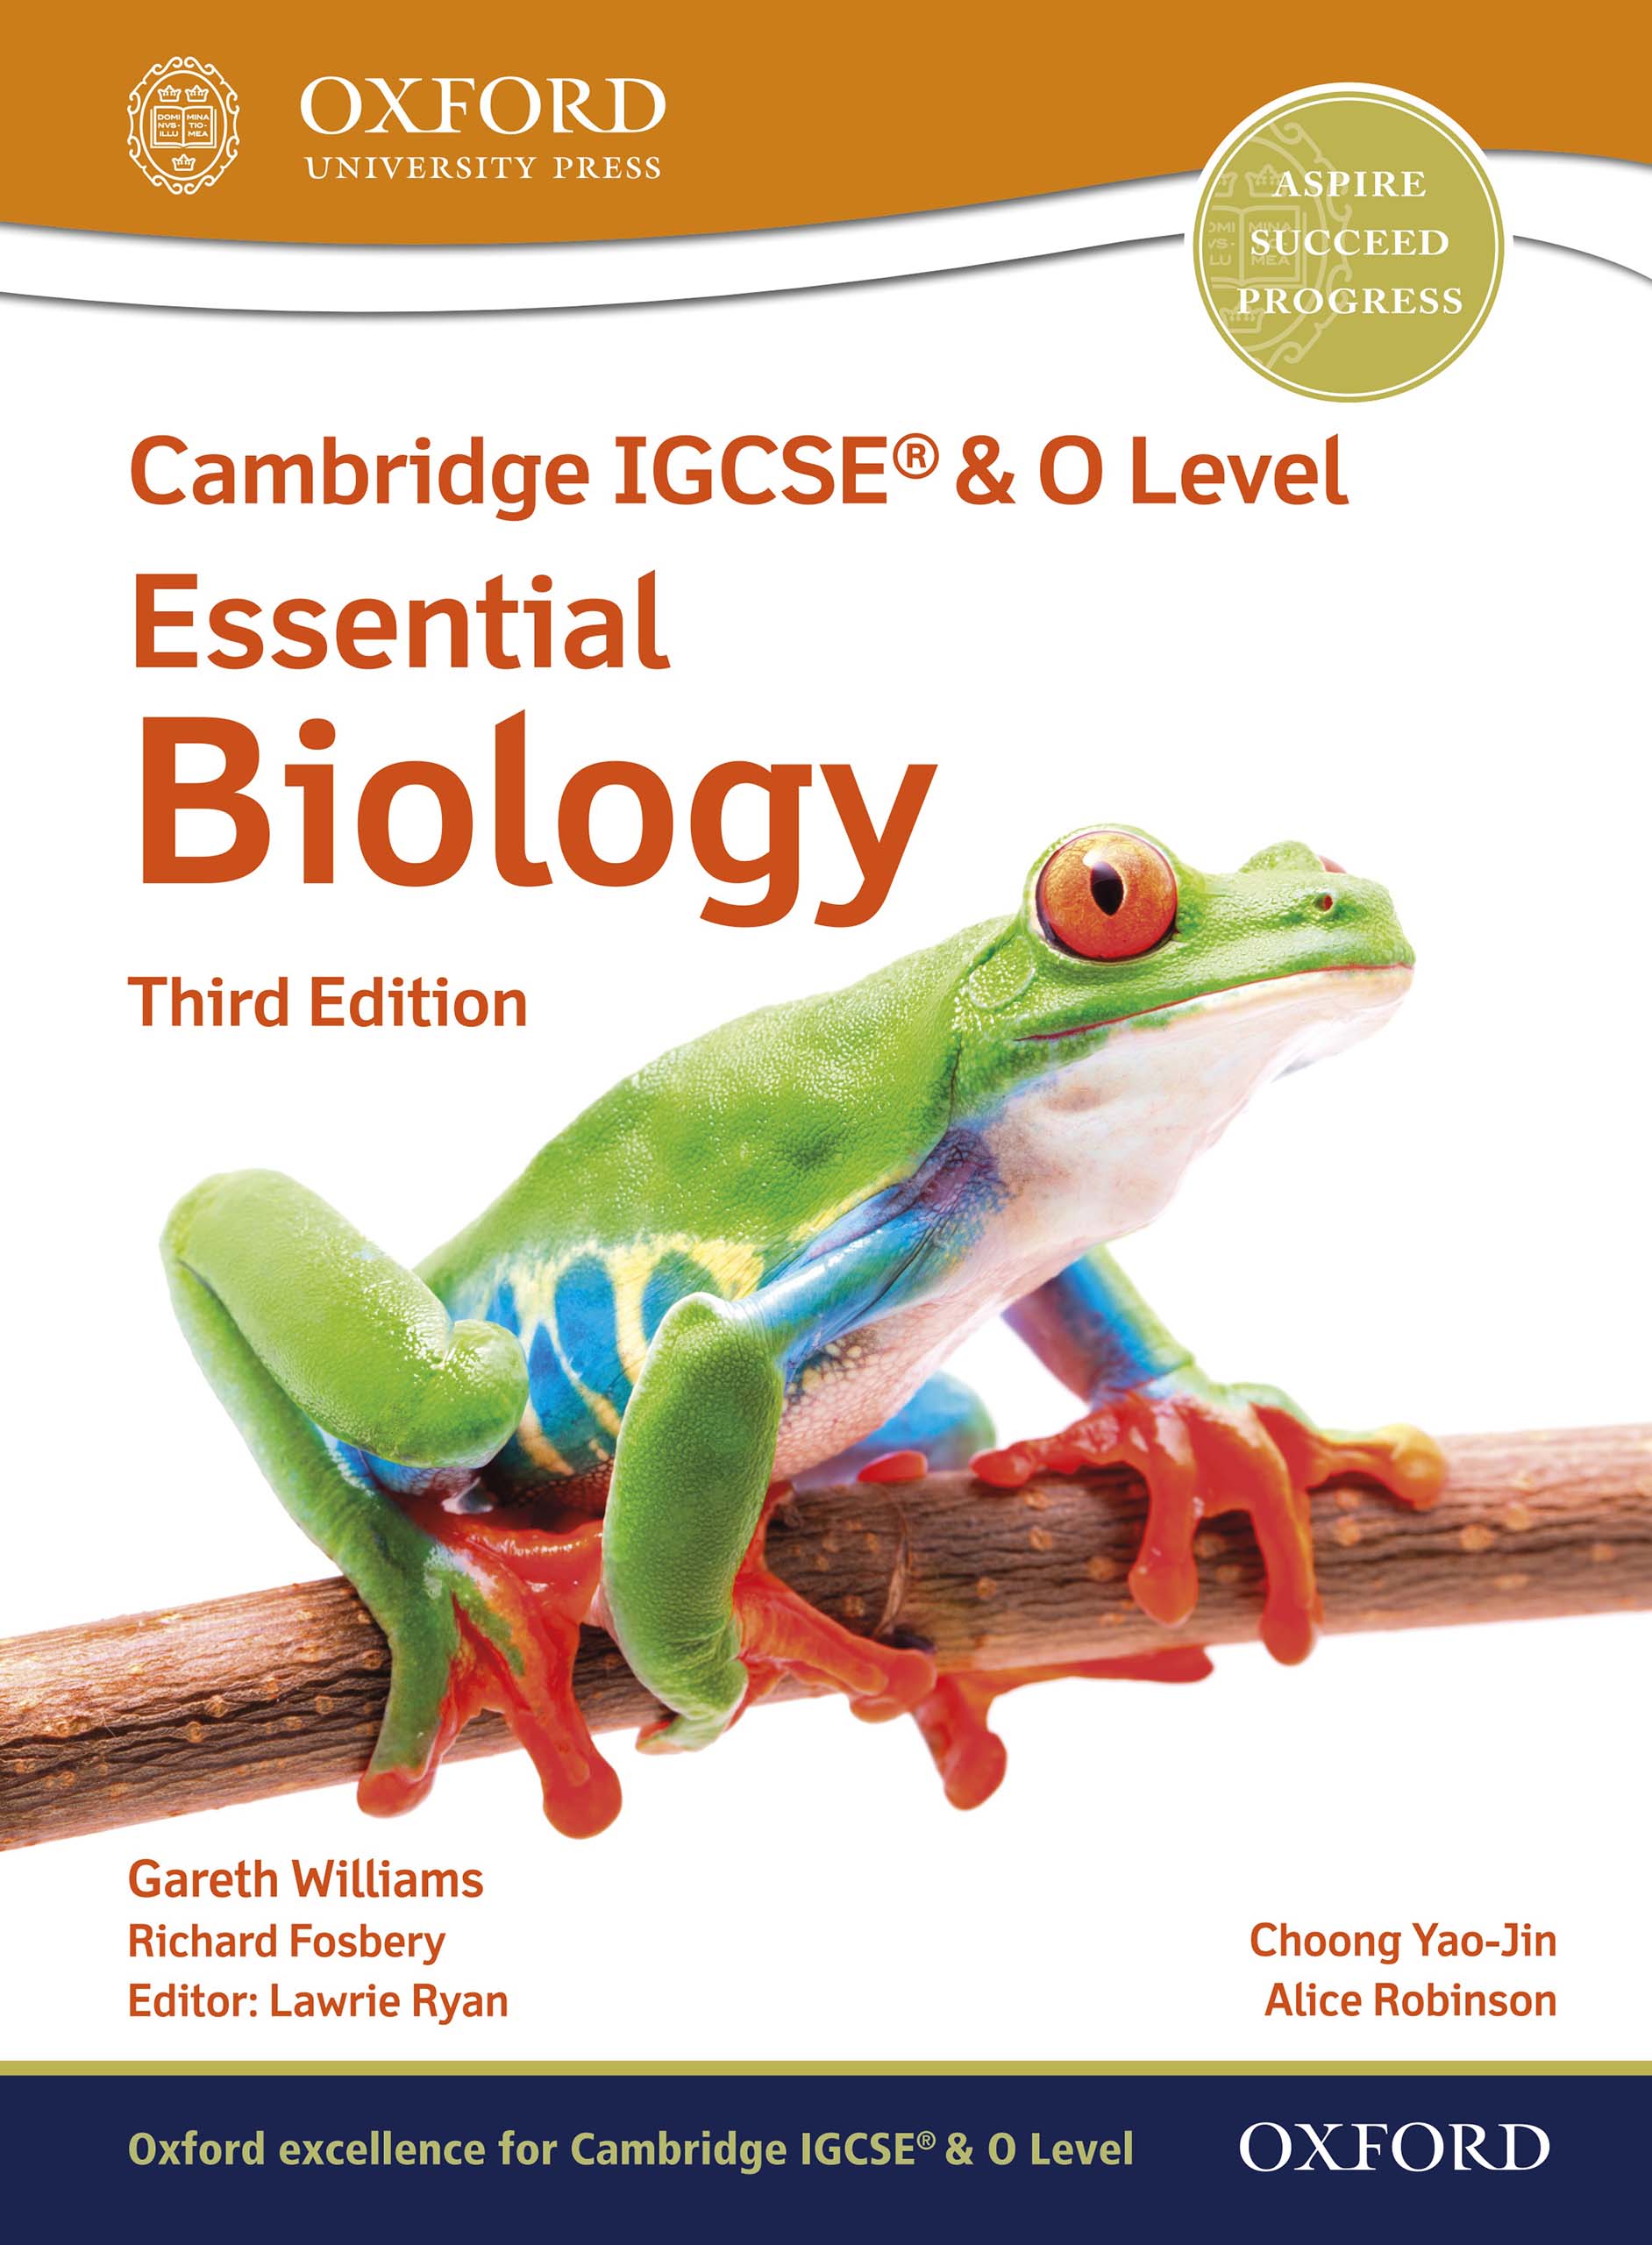 [PDF] Ebook Oxford Cambridge IGCSE and O Level Essential Biology Student Book 3rd Edition